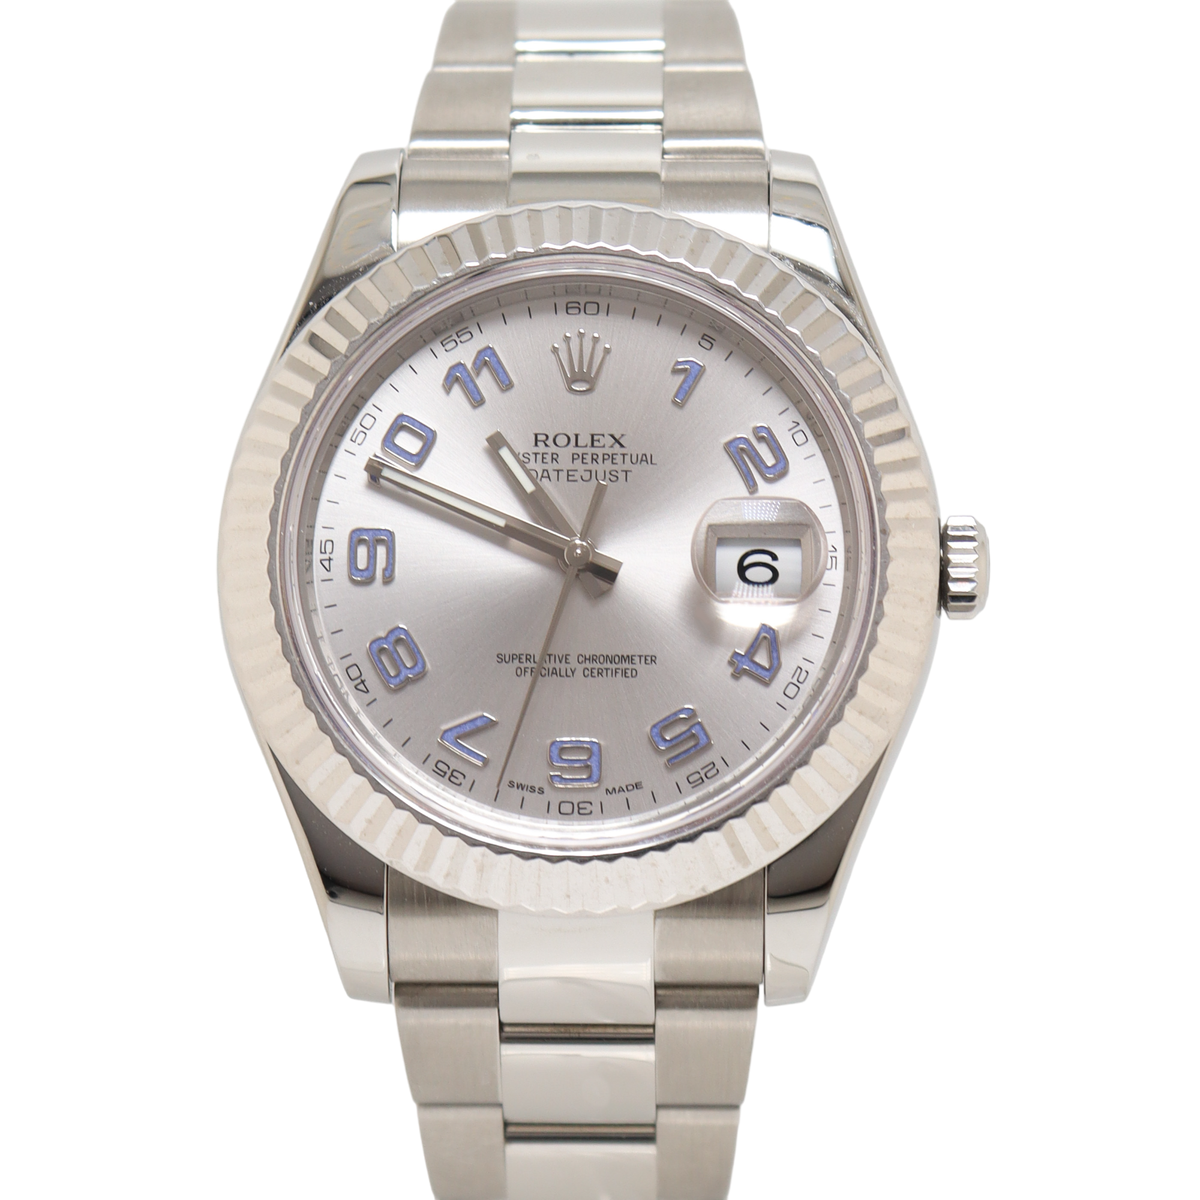 Datejust Stainless Steel 41mm Silver Arabic Dial Watch Reference#: 116334 | Jewelers